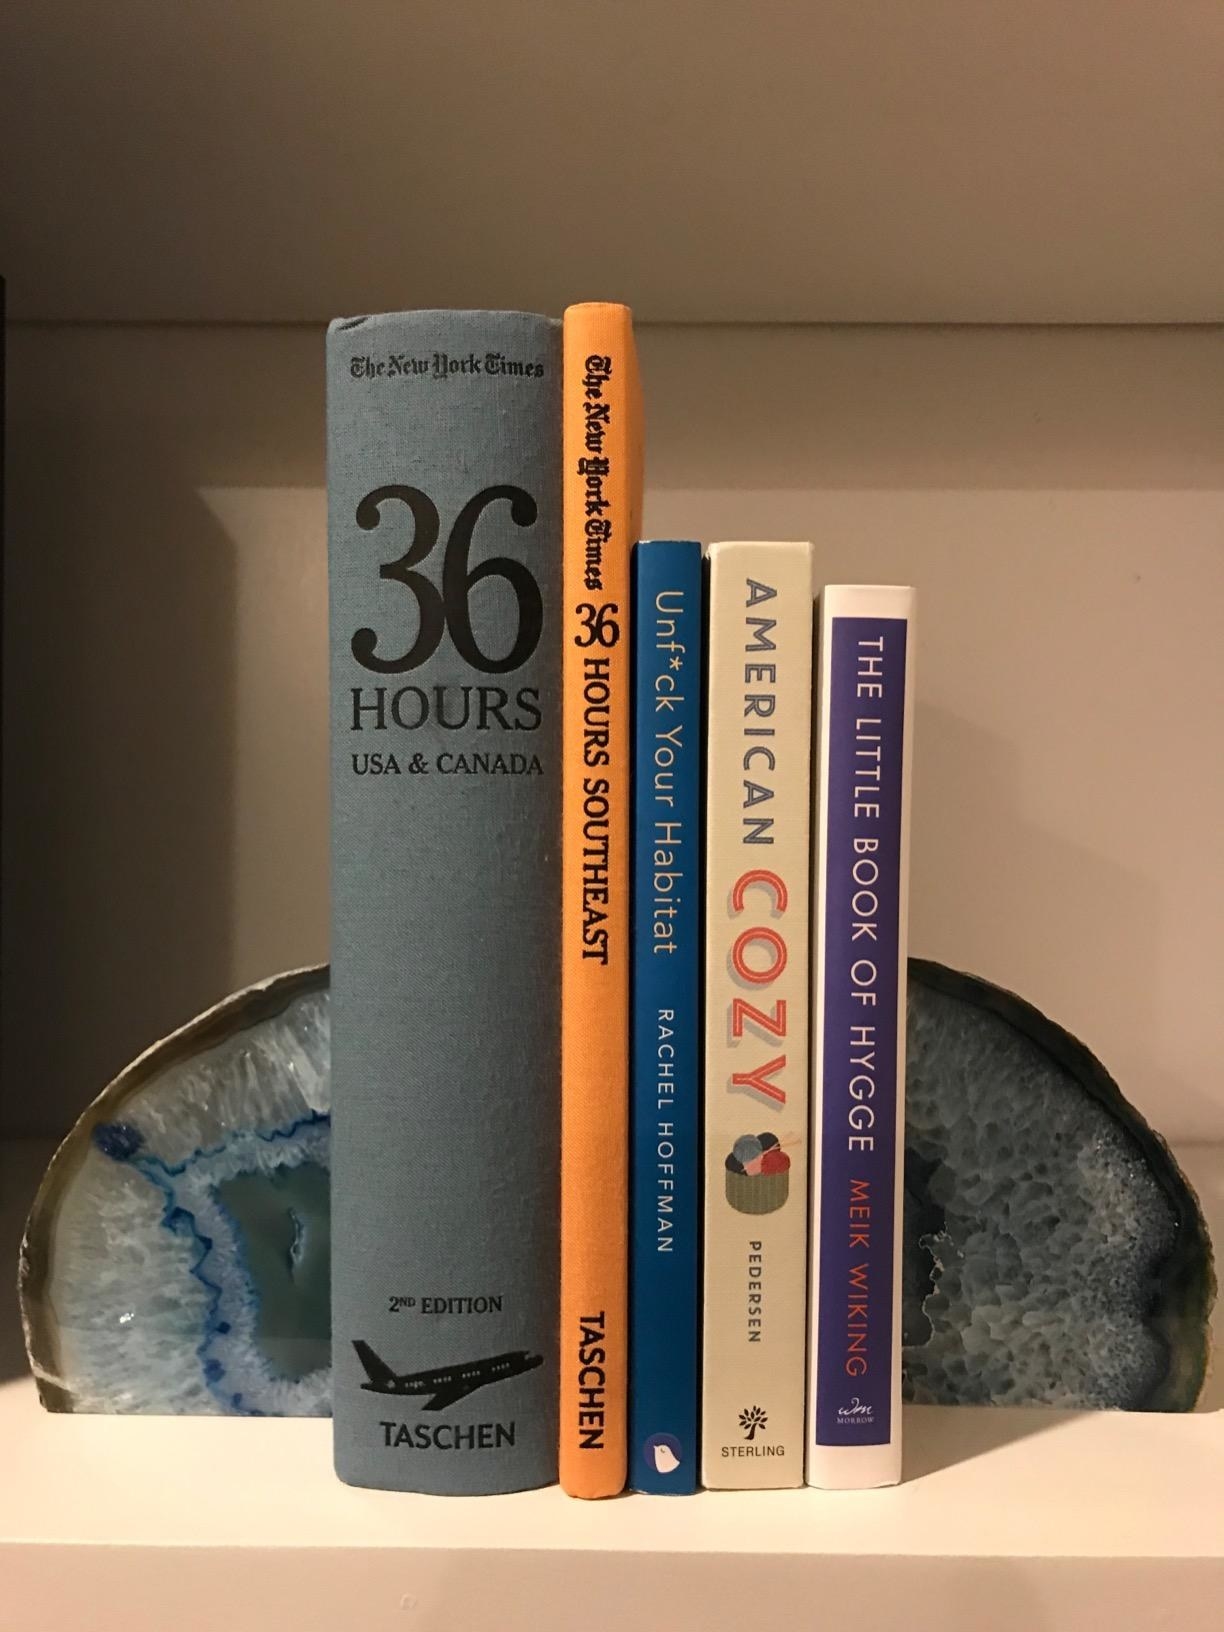 Reviewer image of two book ends with books in the middle